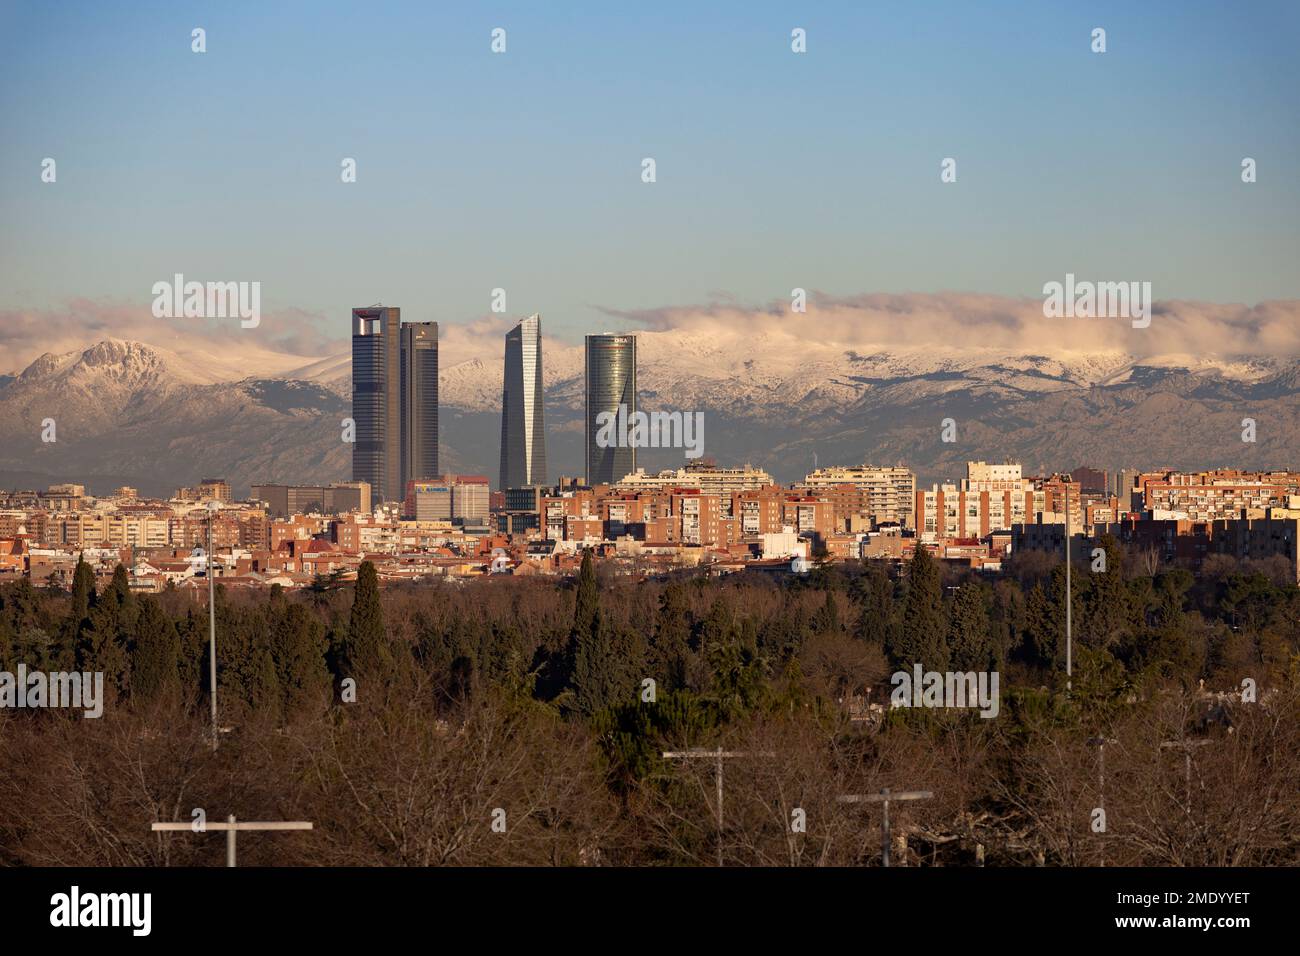 Madrid. Pollution. Contamination. Views of the city of Madrid with a gray and brown layer of pollution beret over the city. Sierra de Guadarrama with Stock Photo